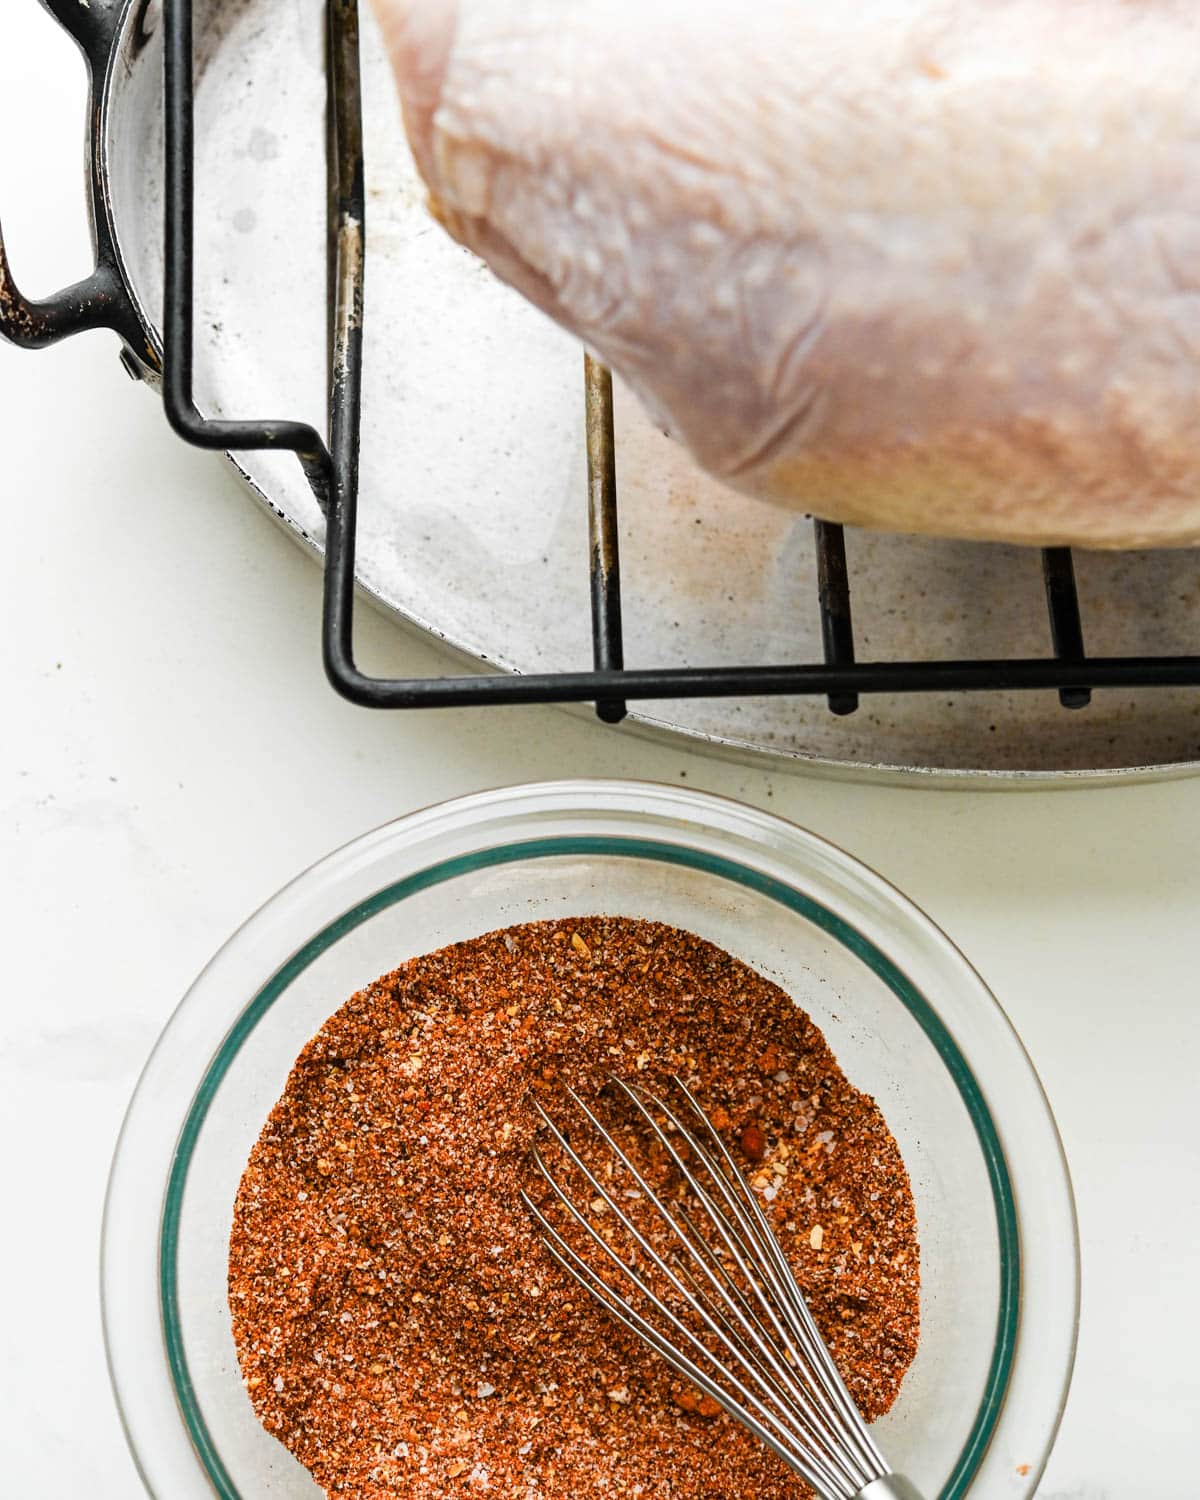 Coating the turkey breast with dry rub.